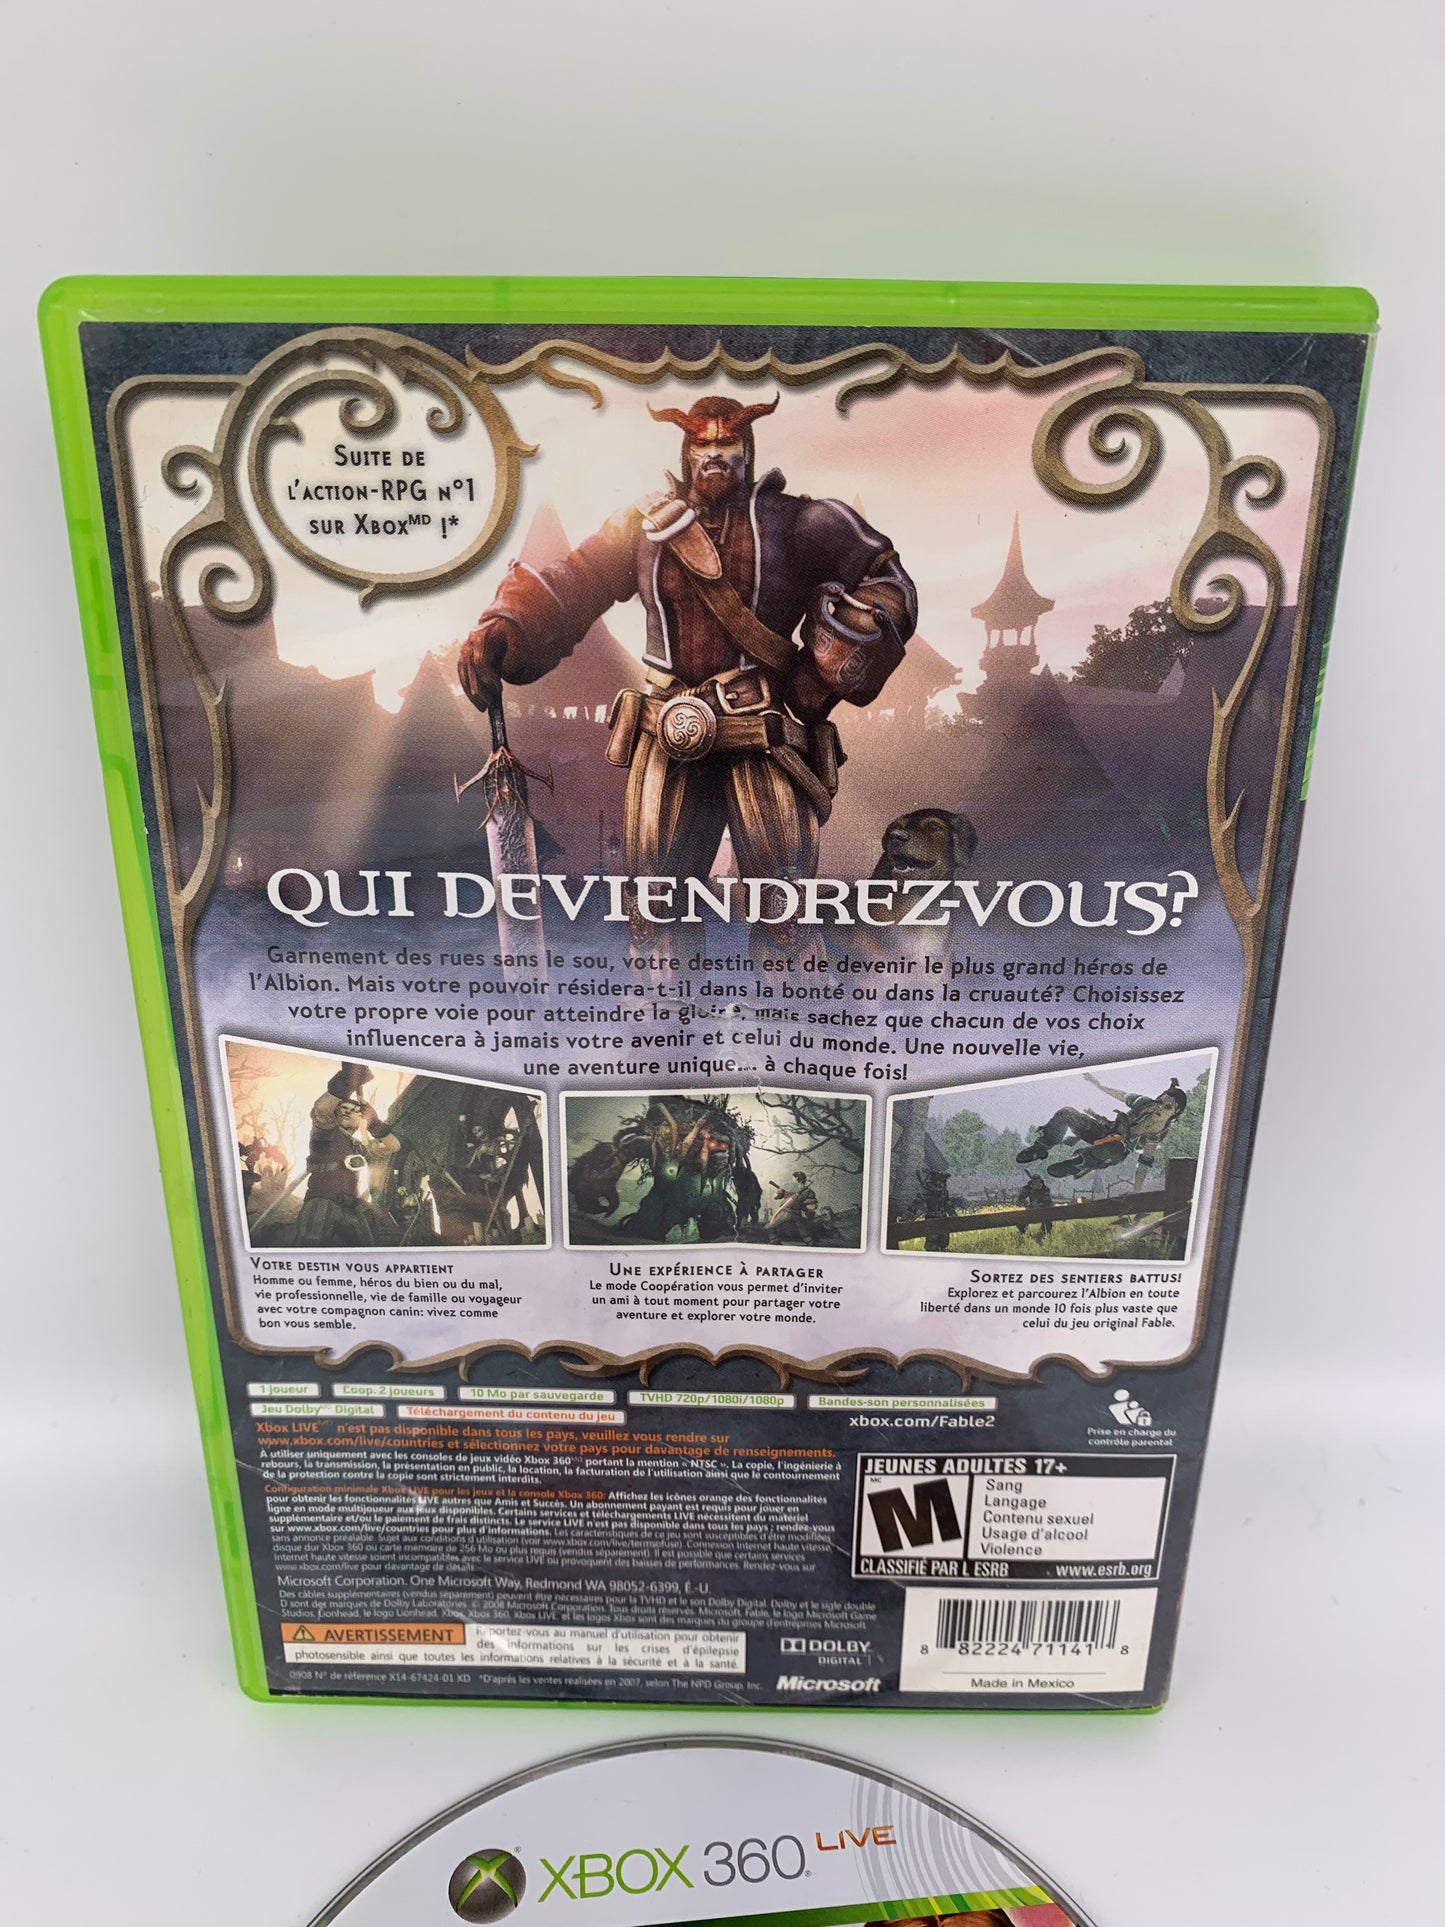 Microsoft XBOX 360 | FABLE II | French version